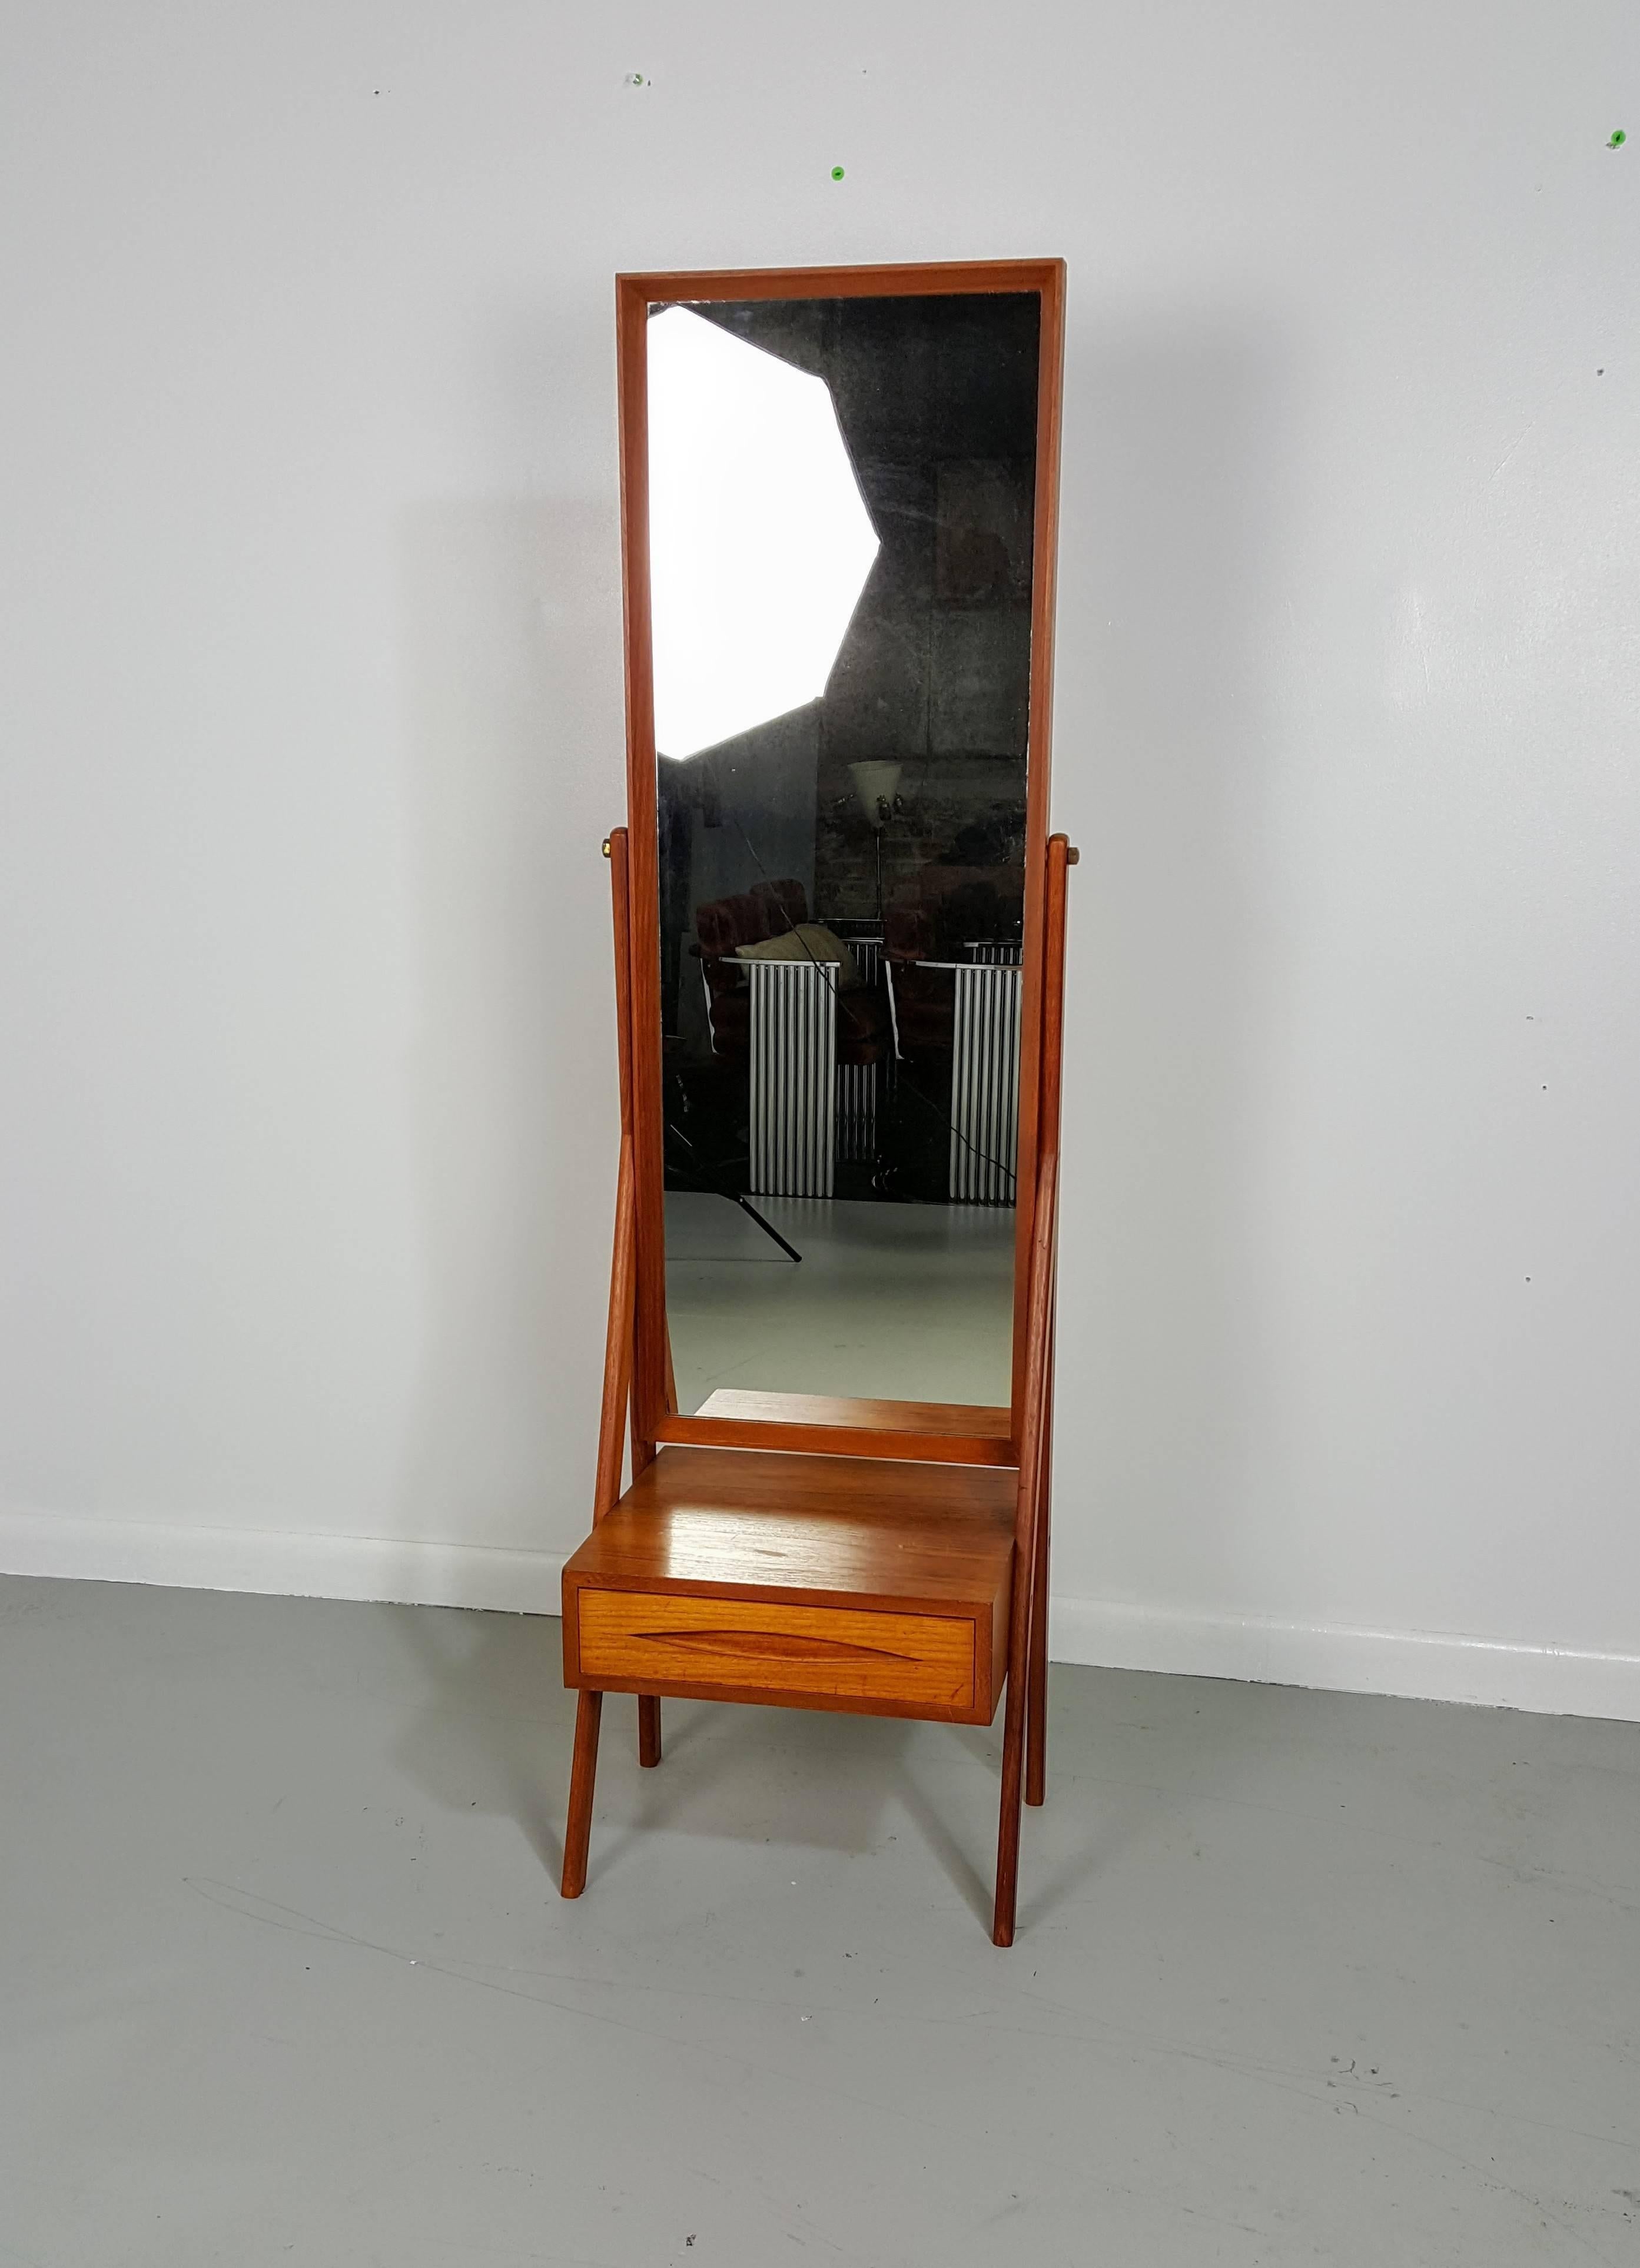 Teak Cheval floor mirror with floating drawer by Arne Vodder, Denmark 1950s. 

We offer free regular deliveries to NYC and Philadelphia area. Delivery to DC, MD, CT and MA are available if schedule permits, please message for a location-based